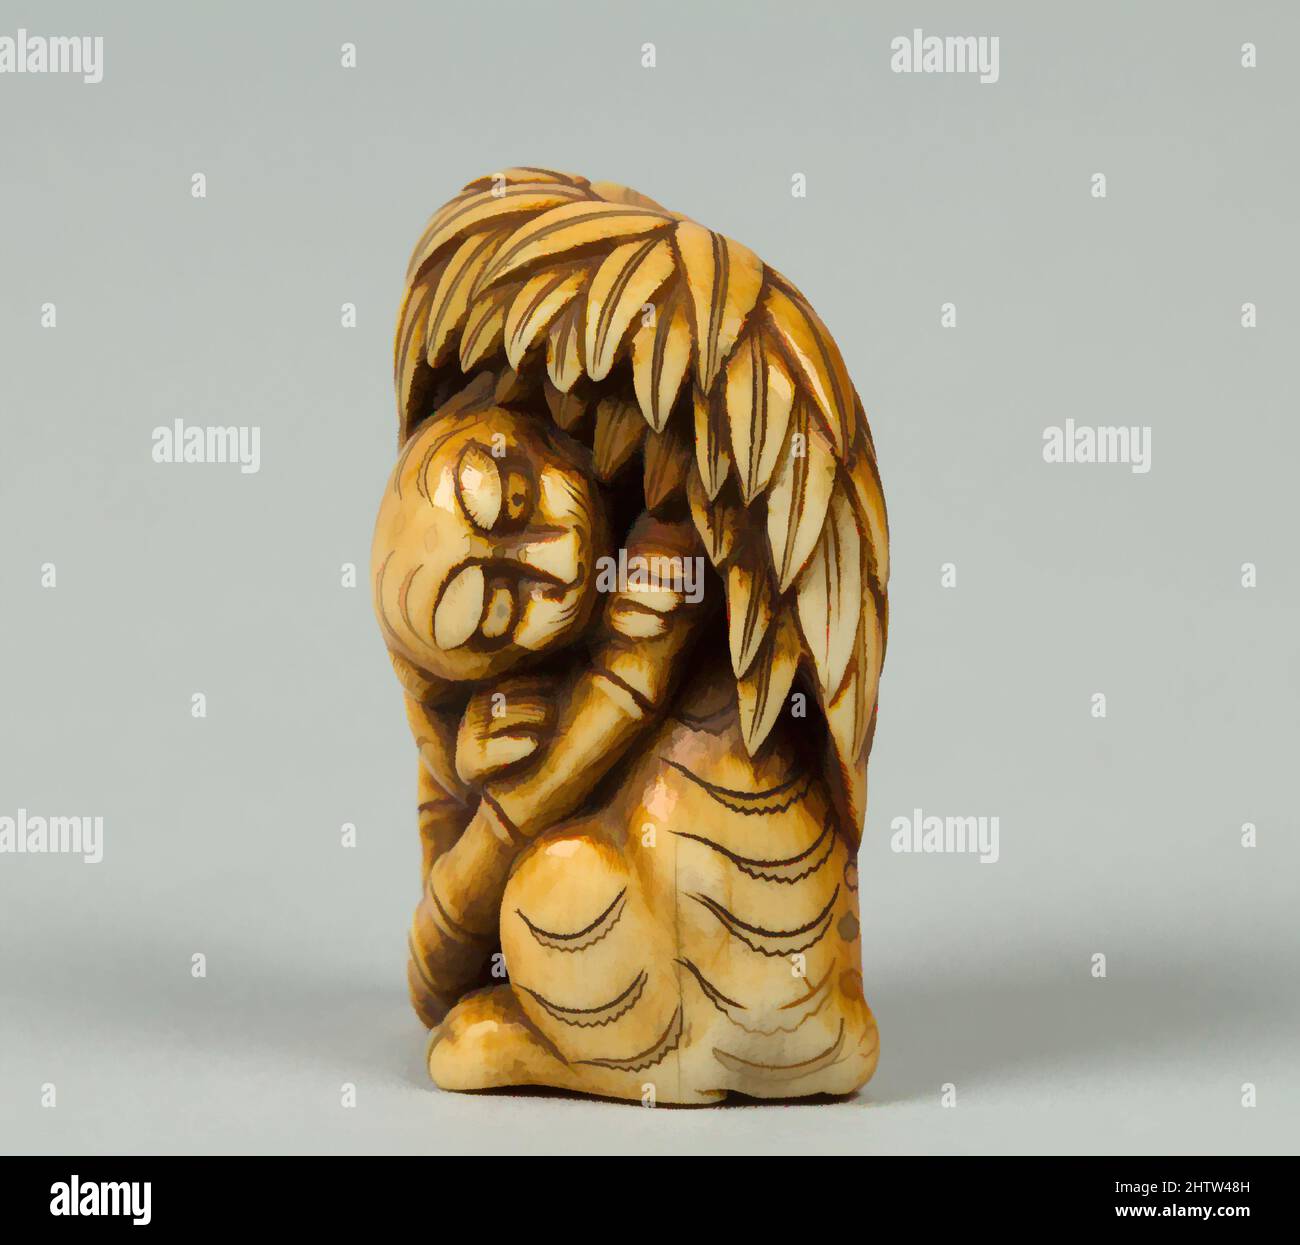 Art inspired by Netsuke of Tiger under a Bamboo Tree, 19th century, Japan, Ivory, H. 1 3/4 in. (4.4 cm), Netsuke, Classic works modernized by Artotop with a splash of modernity. Shapes, color and value, eye-catching visual impact on art. Emotions through freedom of artworks in a contemporary way. A timeless message pursuing a wildly creative new direction. Artists turning to the digital medium and creating the Artotop NFT Stock Photo